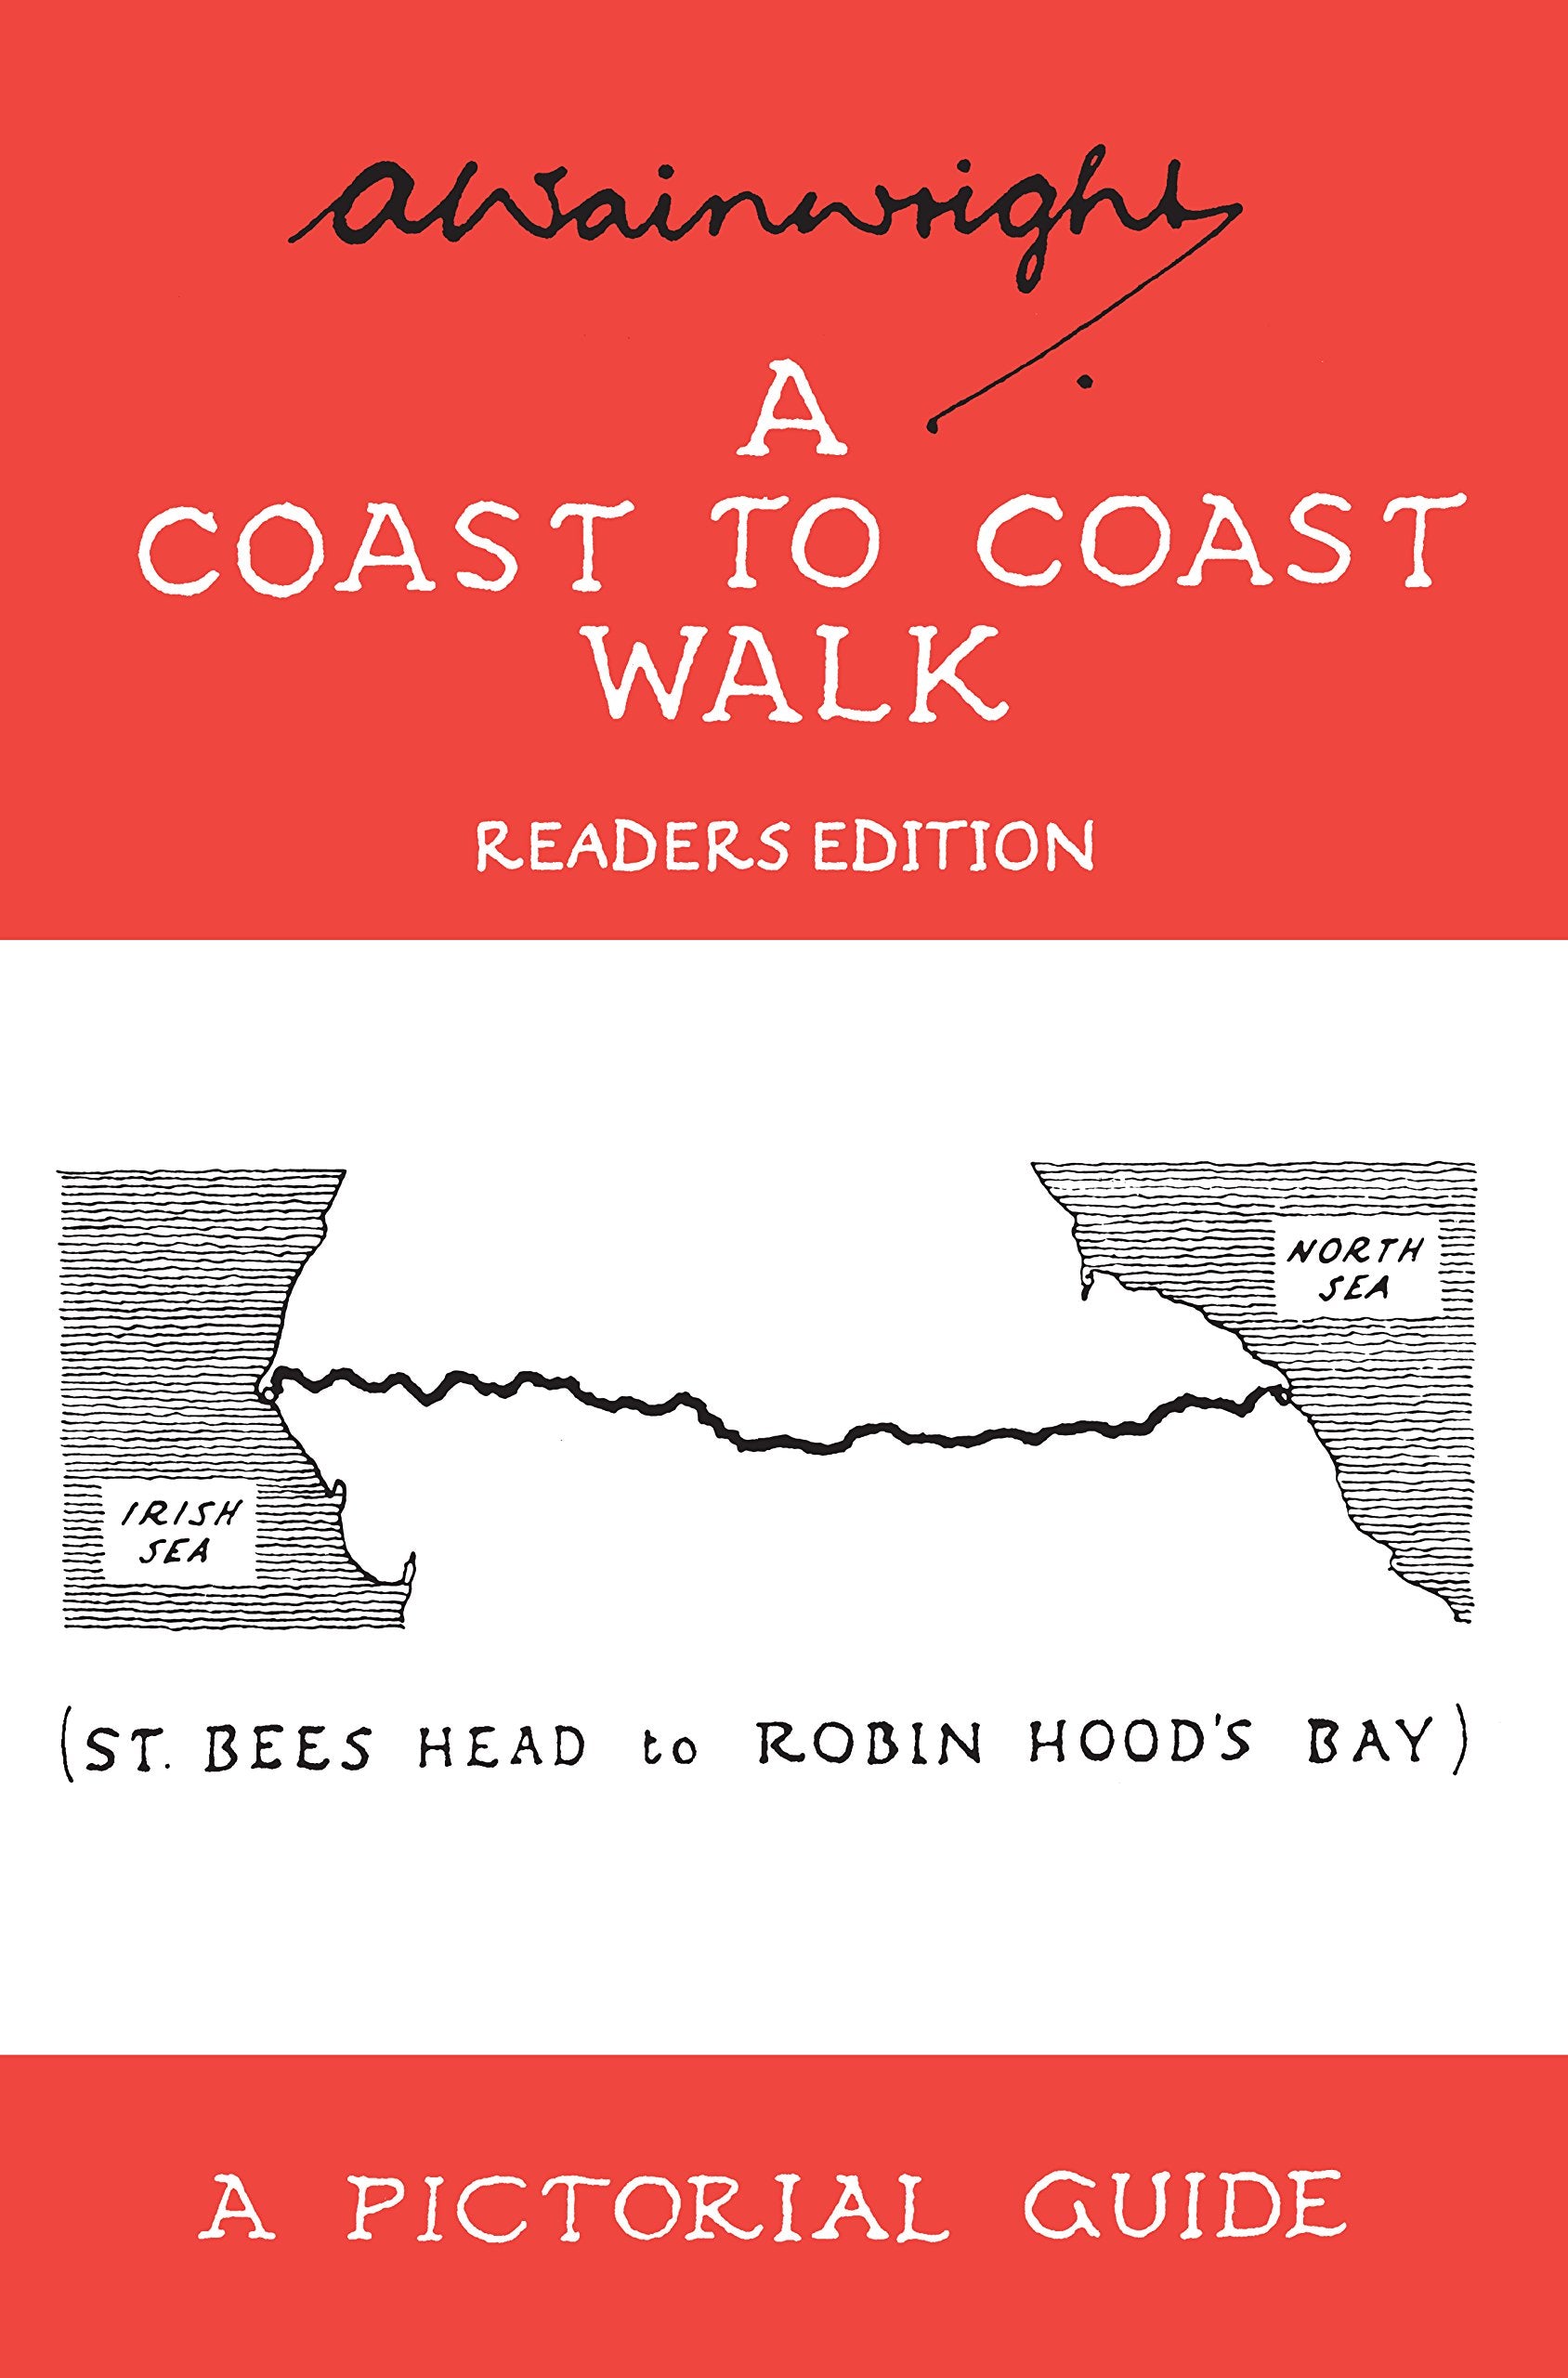 A Coast to Coast Walk: Alfred Wainwright's Pictorial Guide